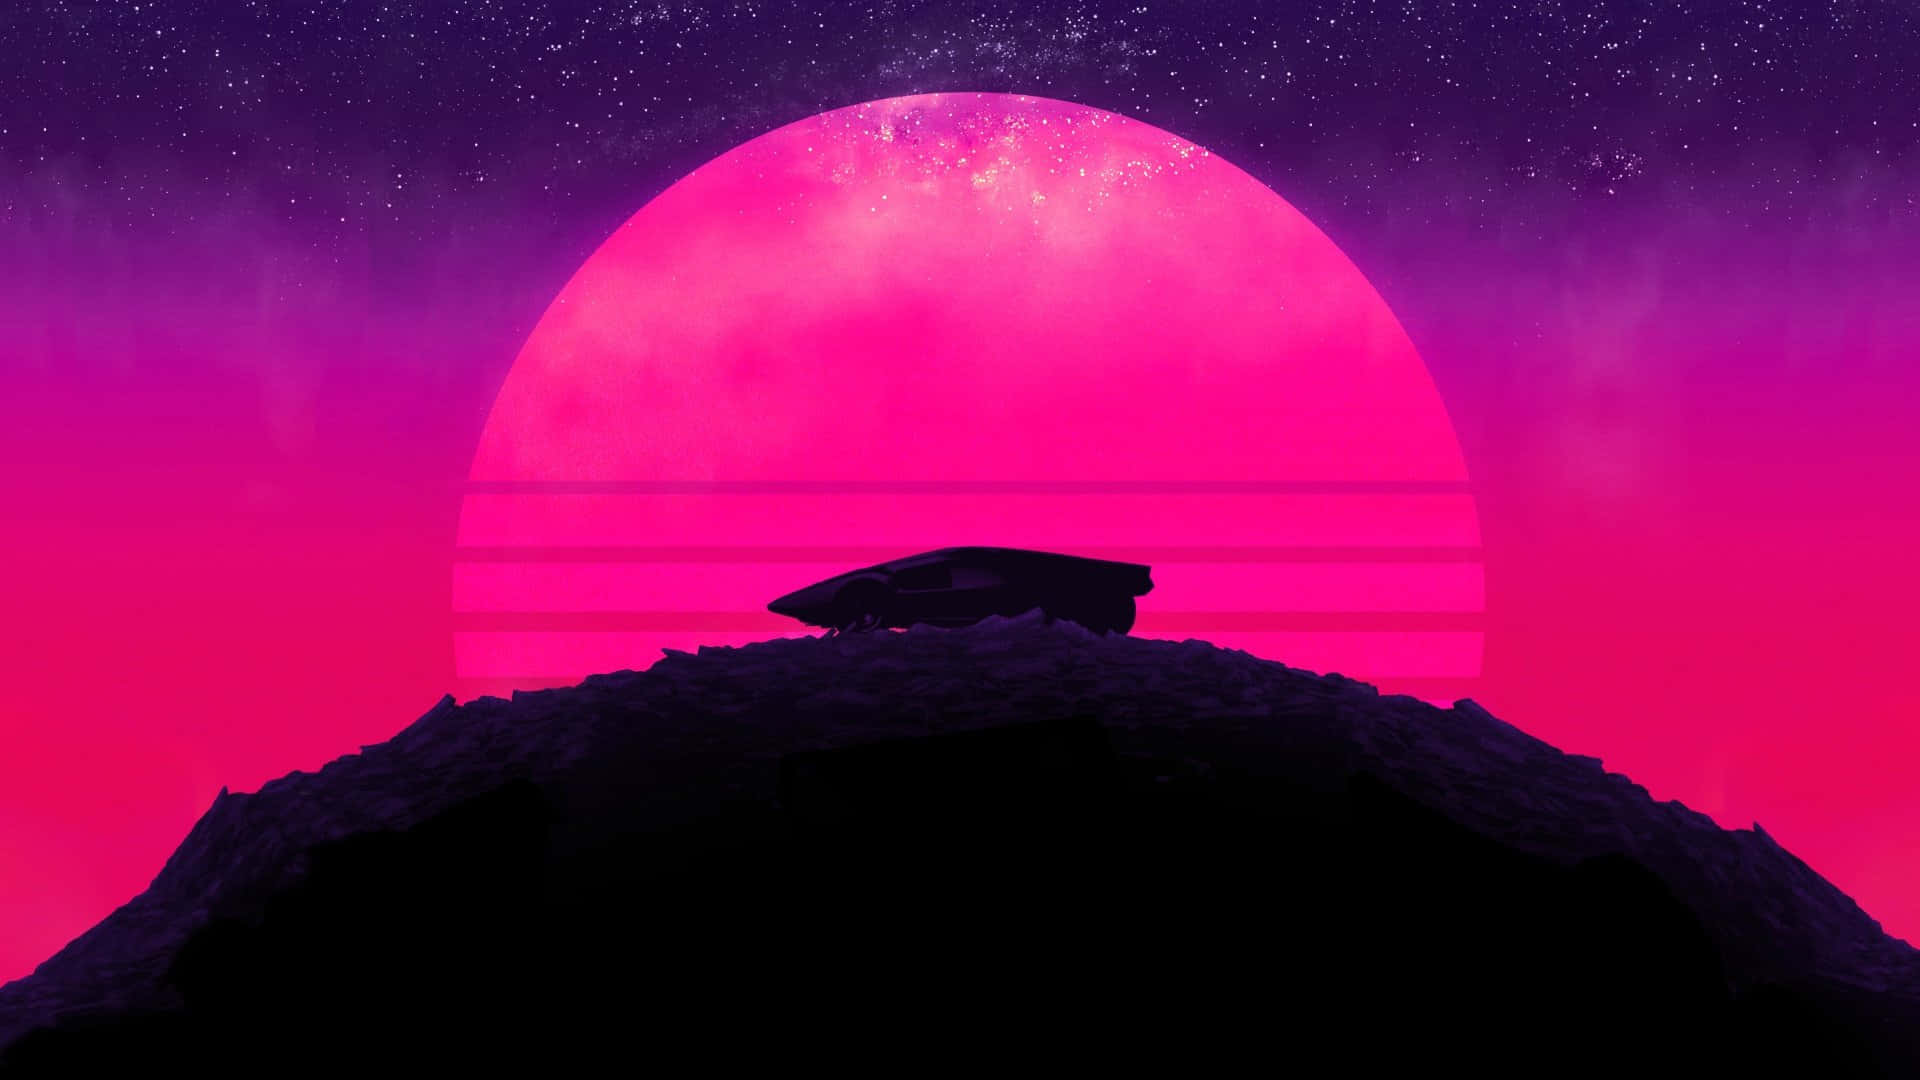 Car Silhouette Over Big Pink Moon Wallpaper